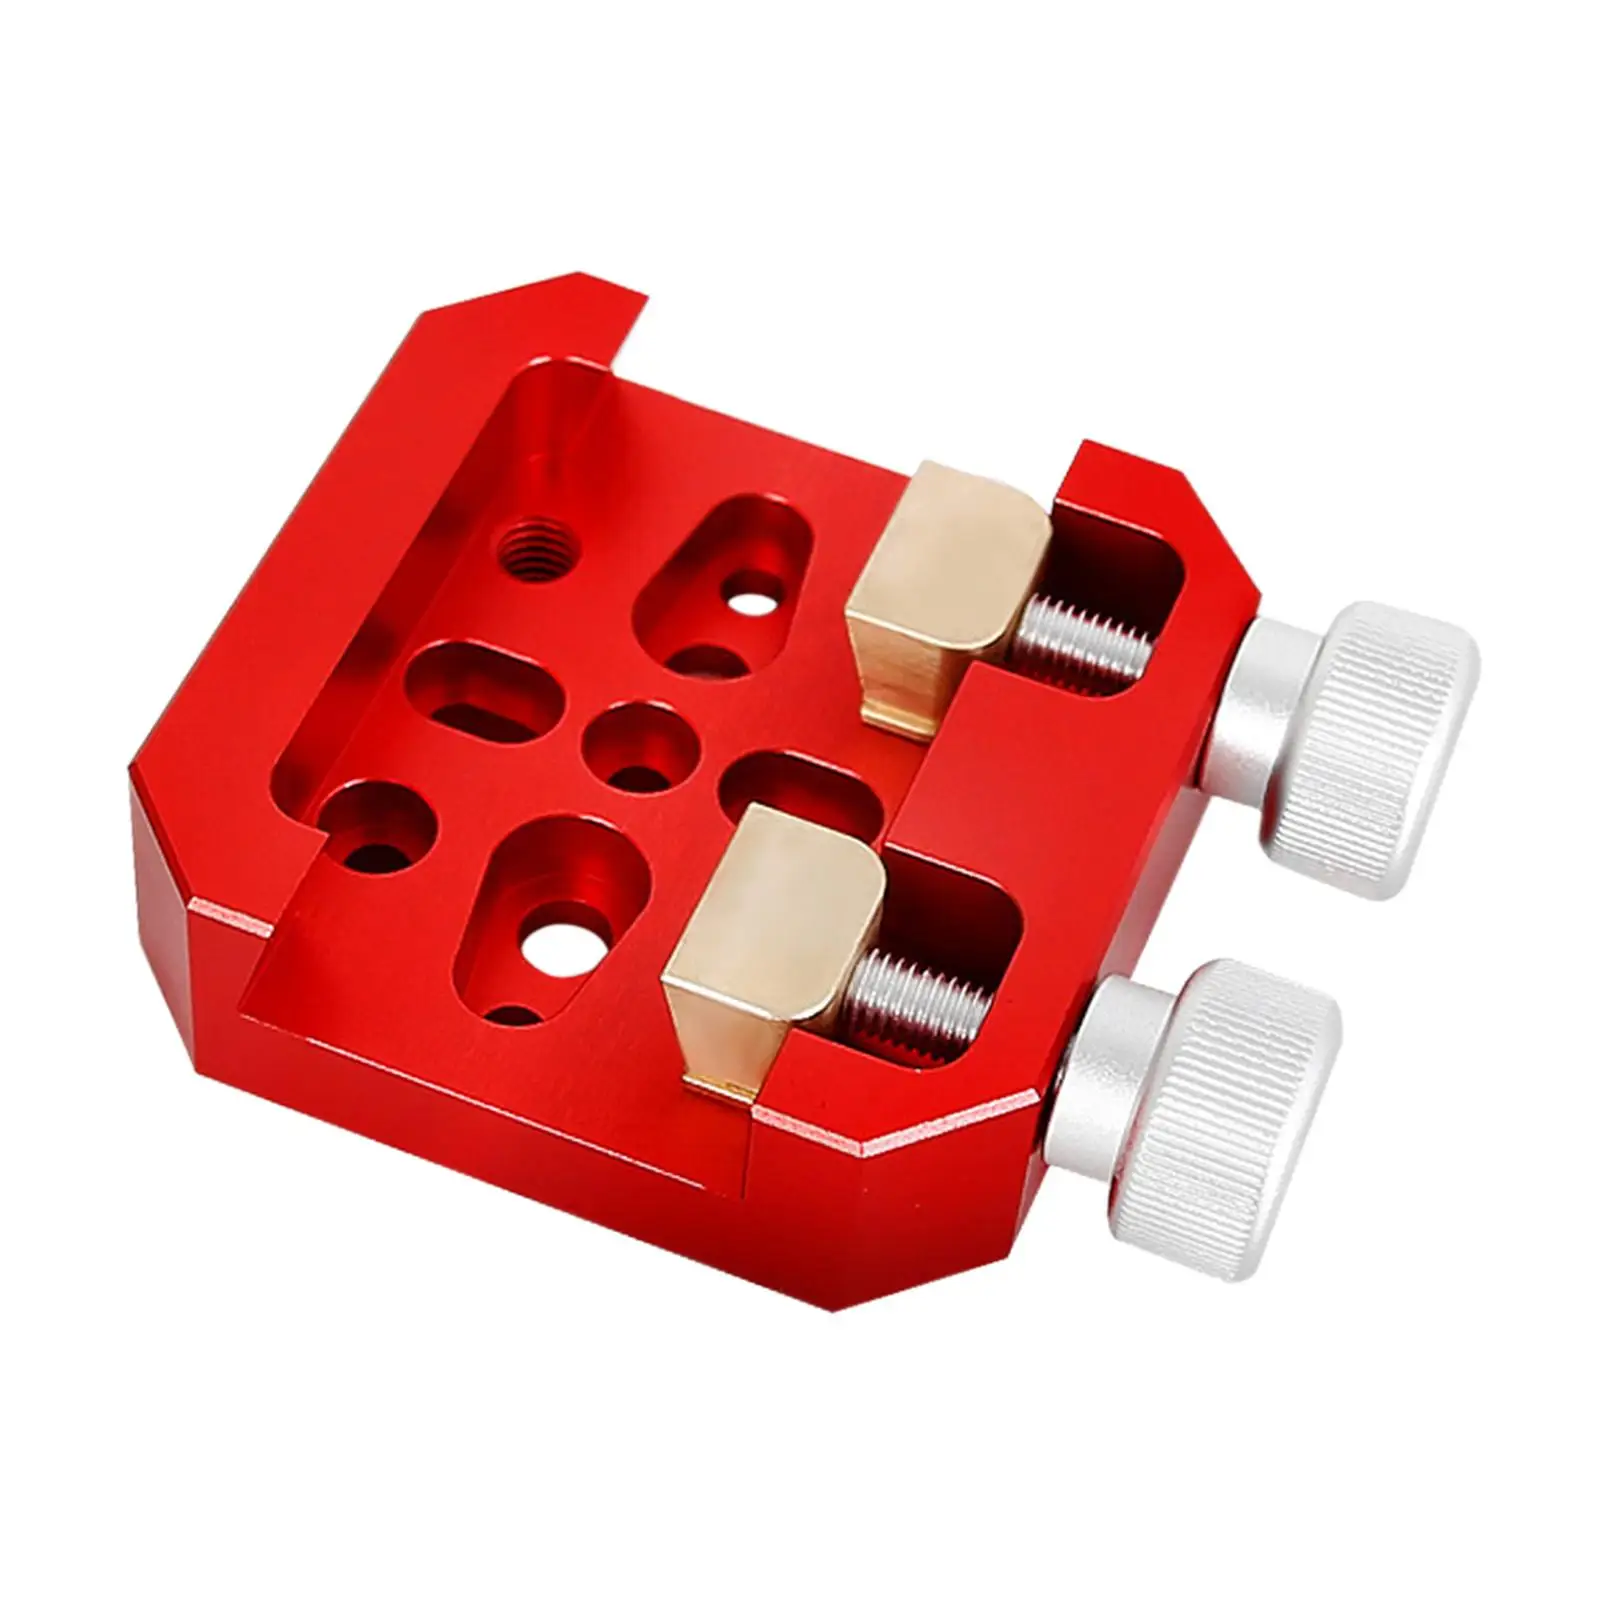 Telescope Dovetail Clamp Multifunction Stable for Telescope Adapter Fittings